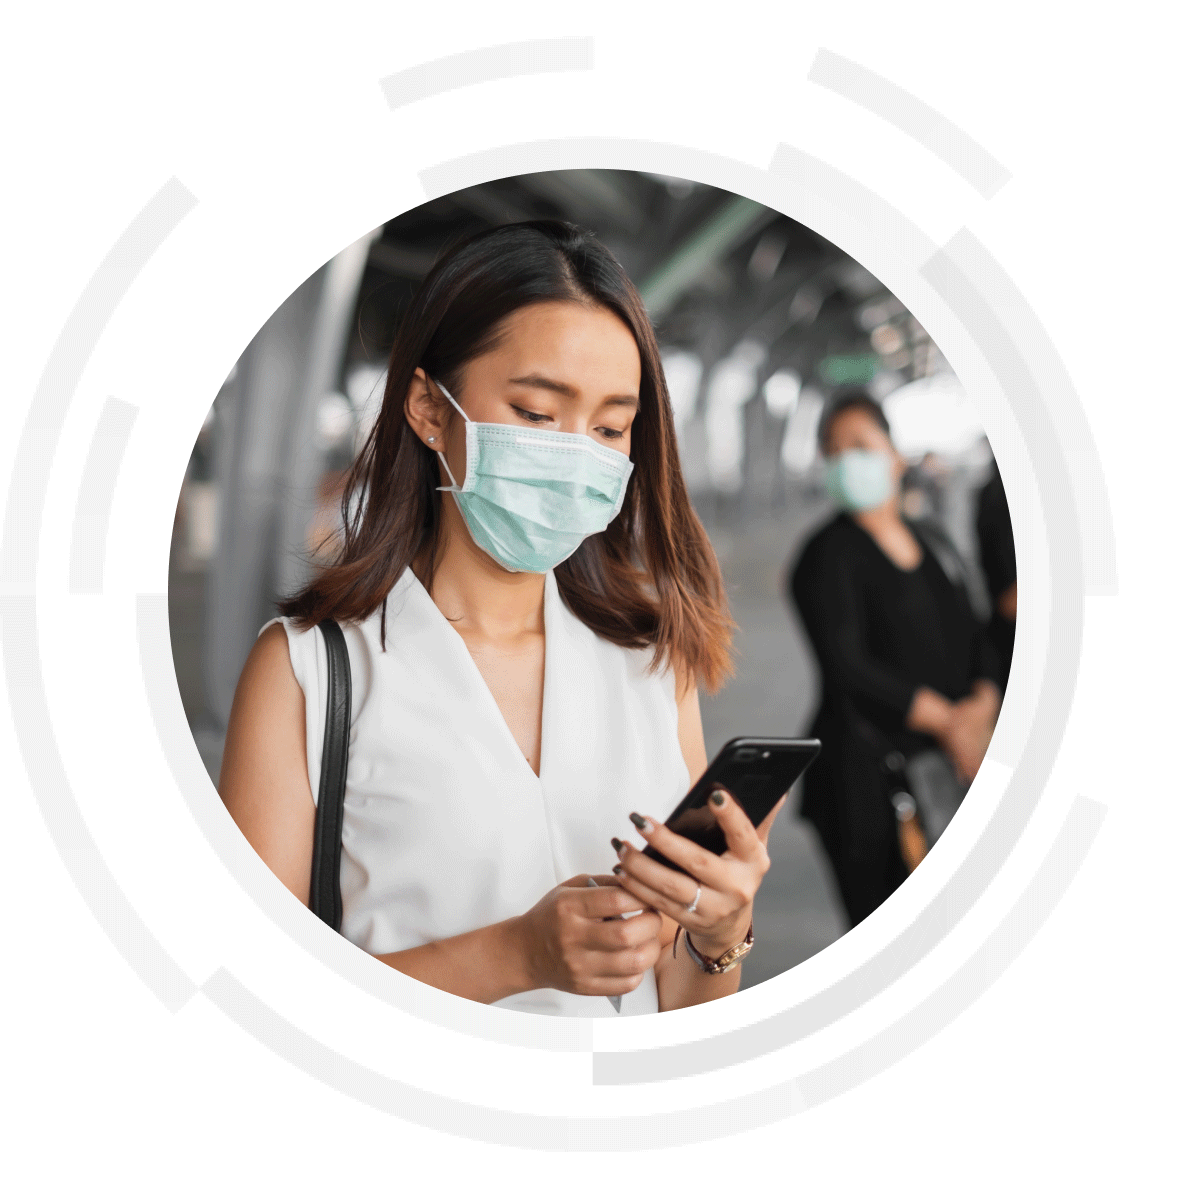 Woman wearing a mask scrolling on her mobile phone.